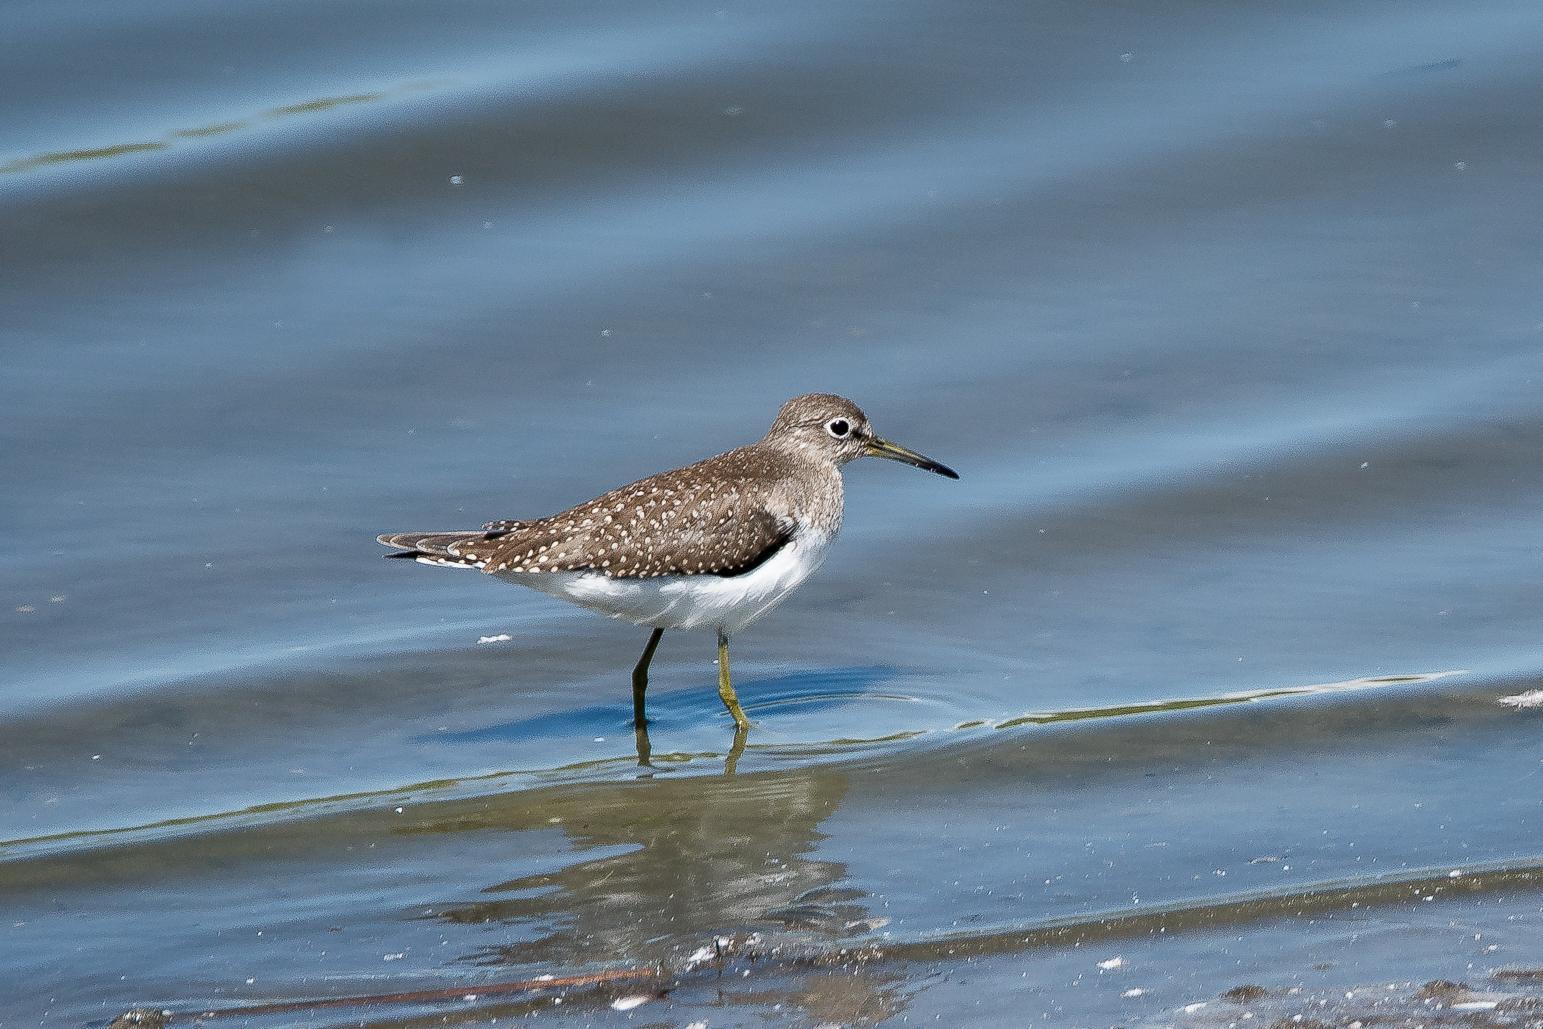 Solitary Sandpiper Photo by Gerald Hoekstra